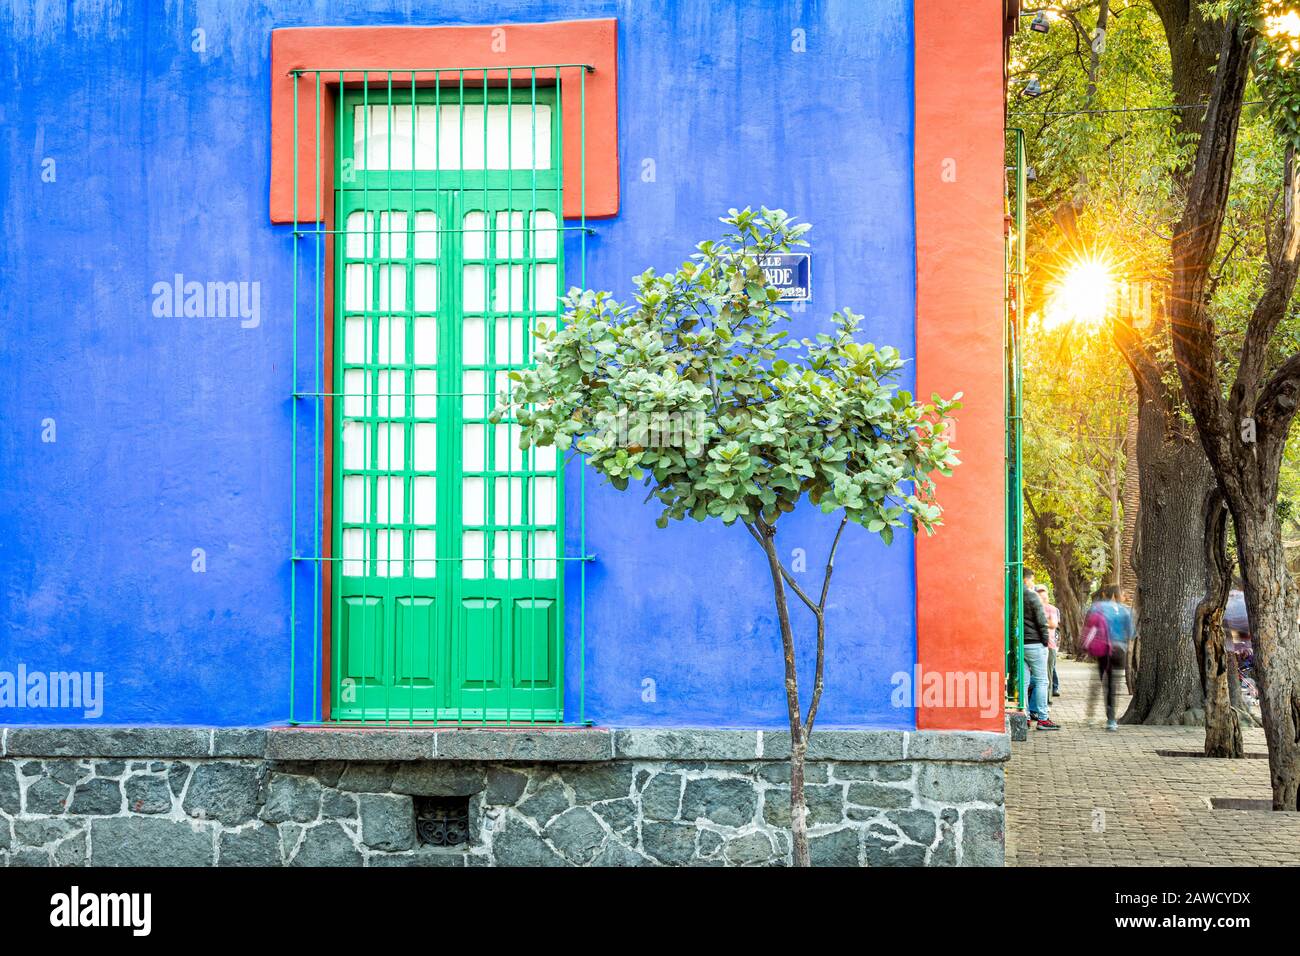 Street view of the Blue House (Museo Casa Azul), the home of Frida Kahlo for most of her life, in Coyoacan, Mexico. Stock Photo